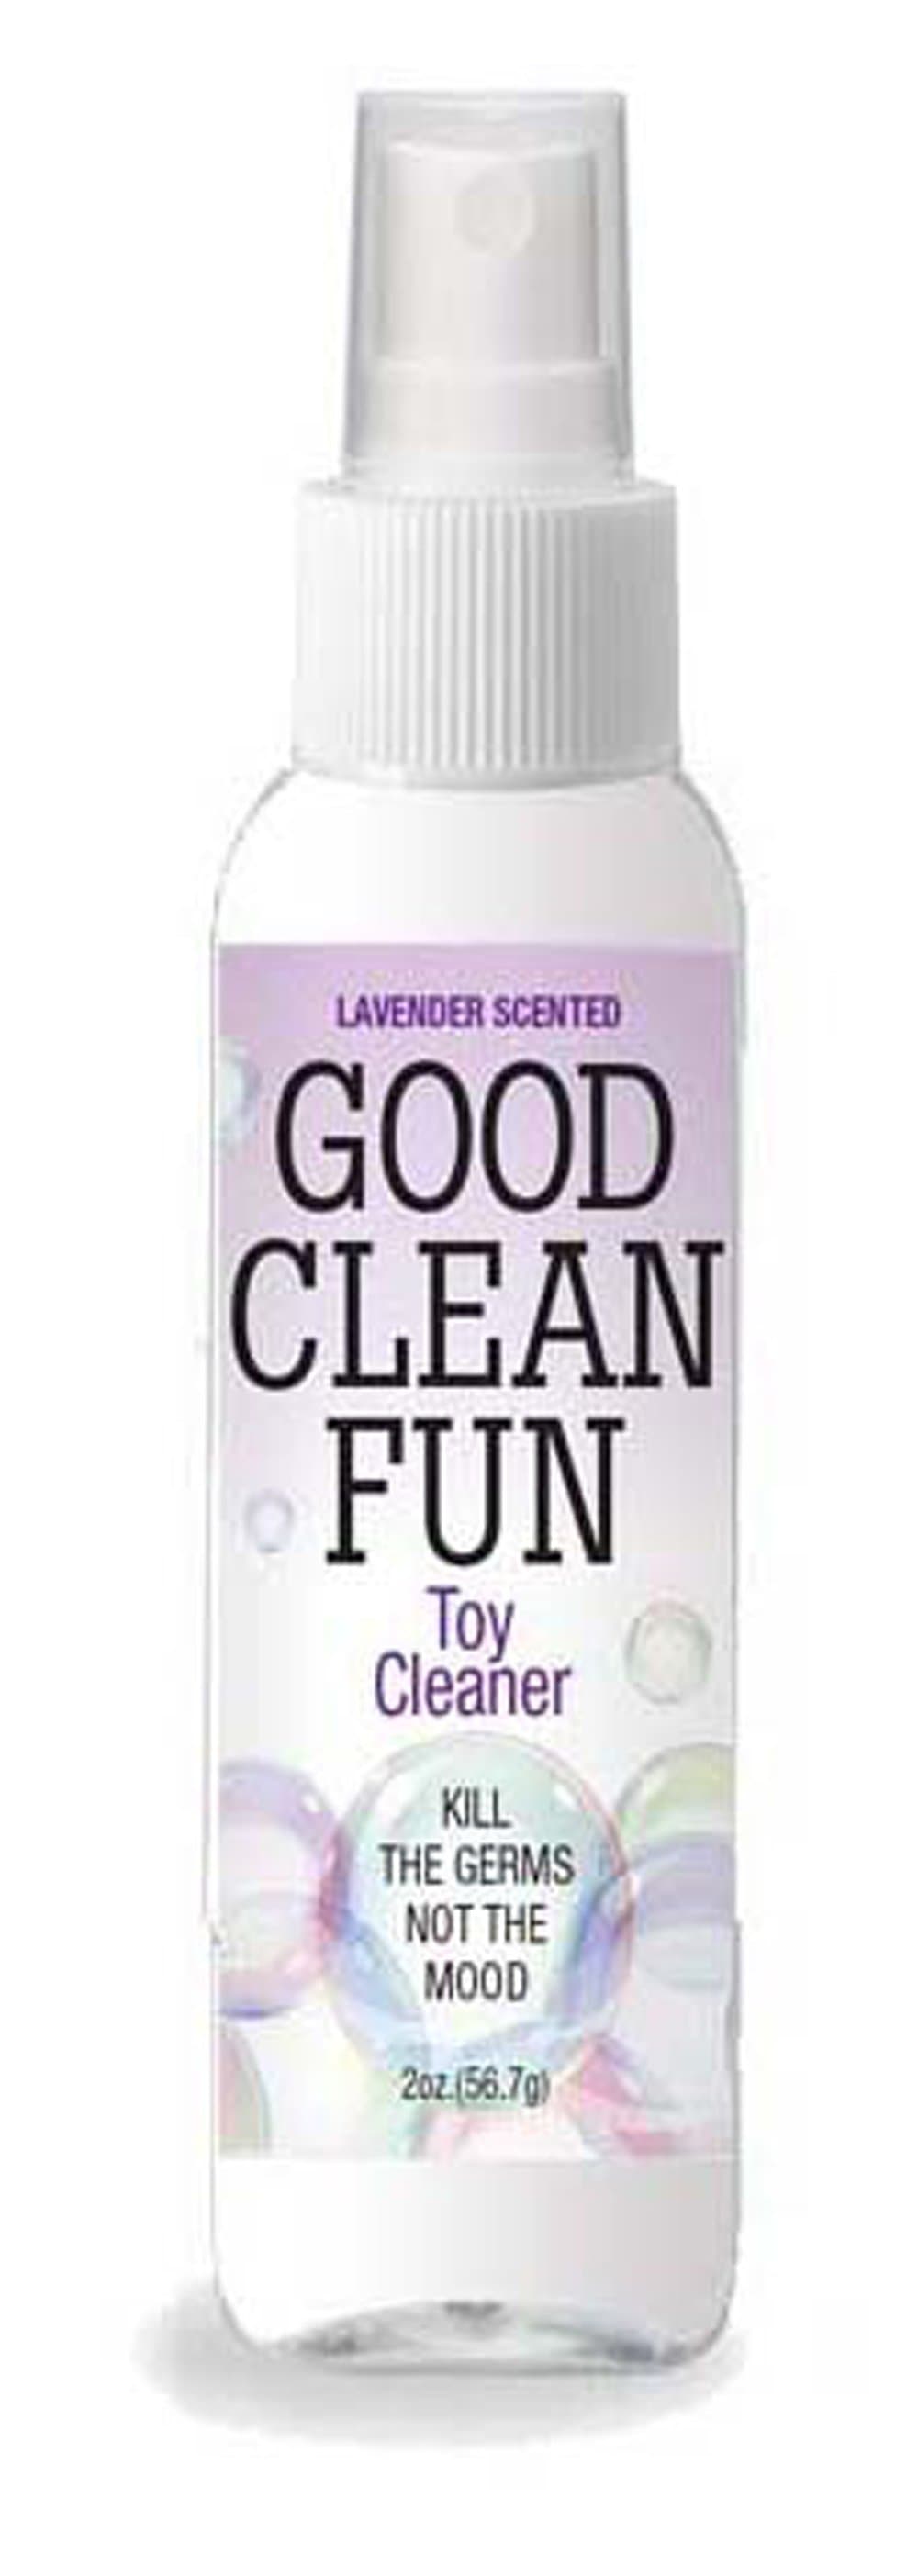 sex toy cleaner, how to clean sex toys